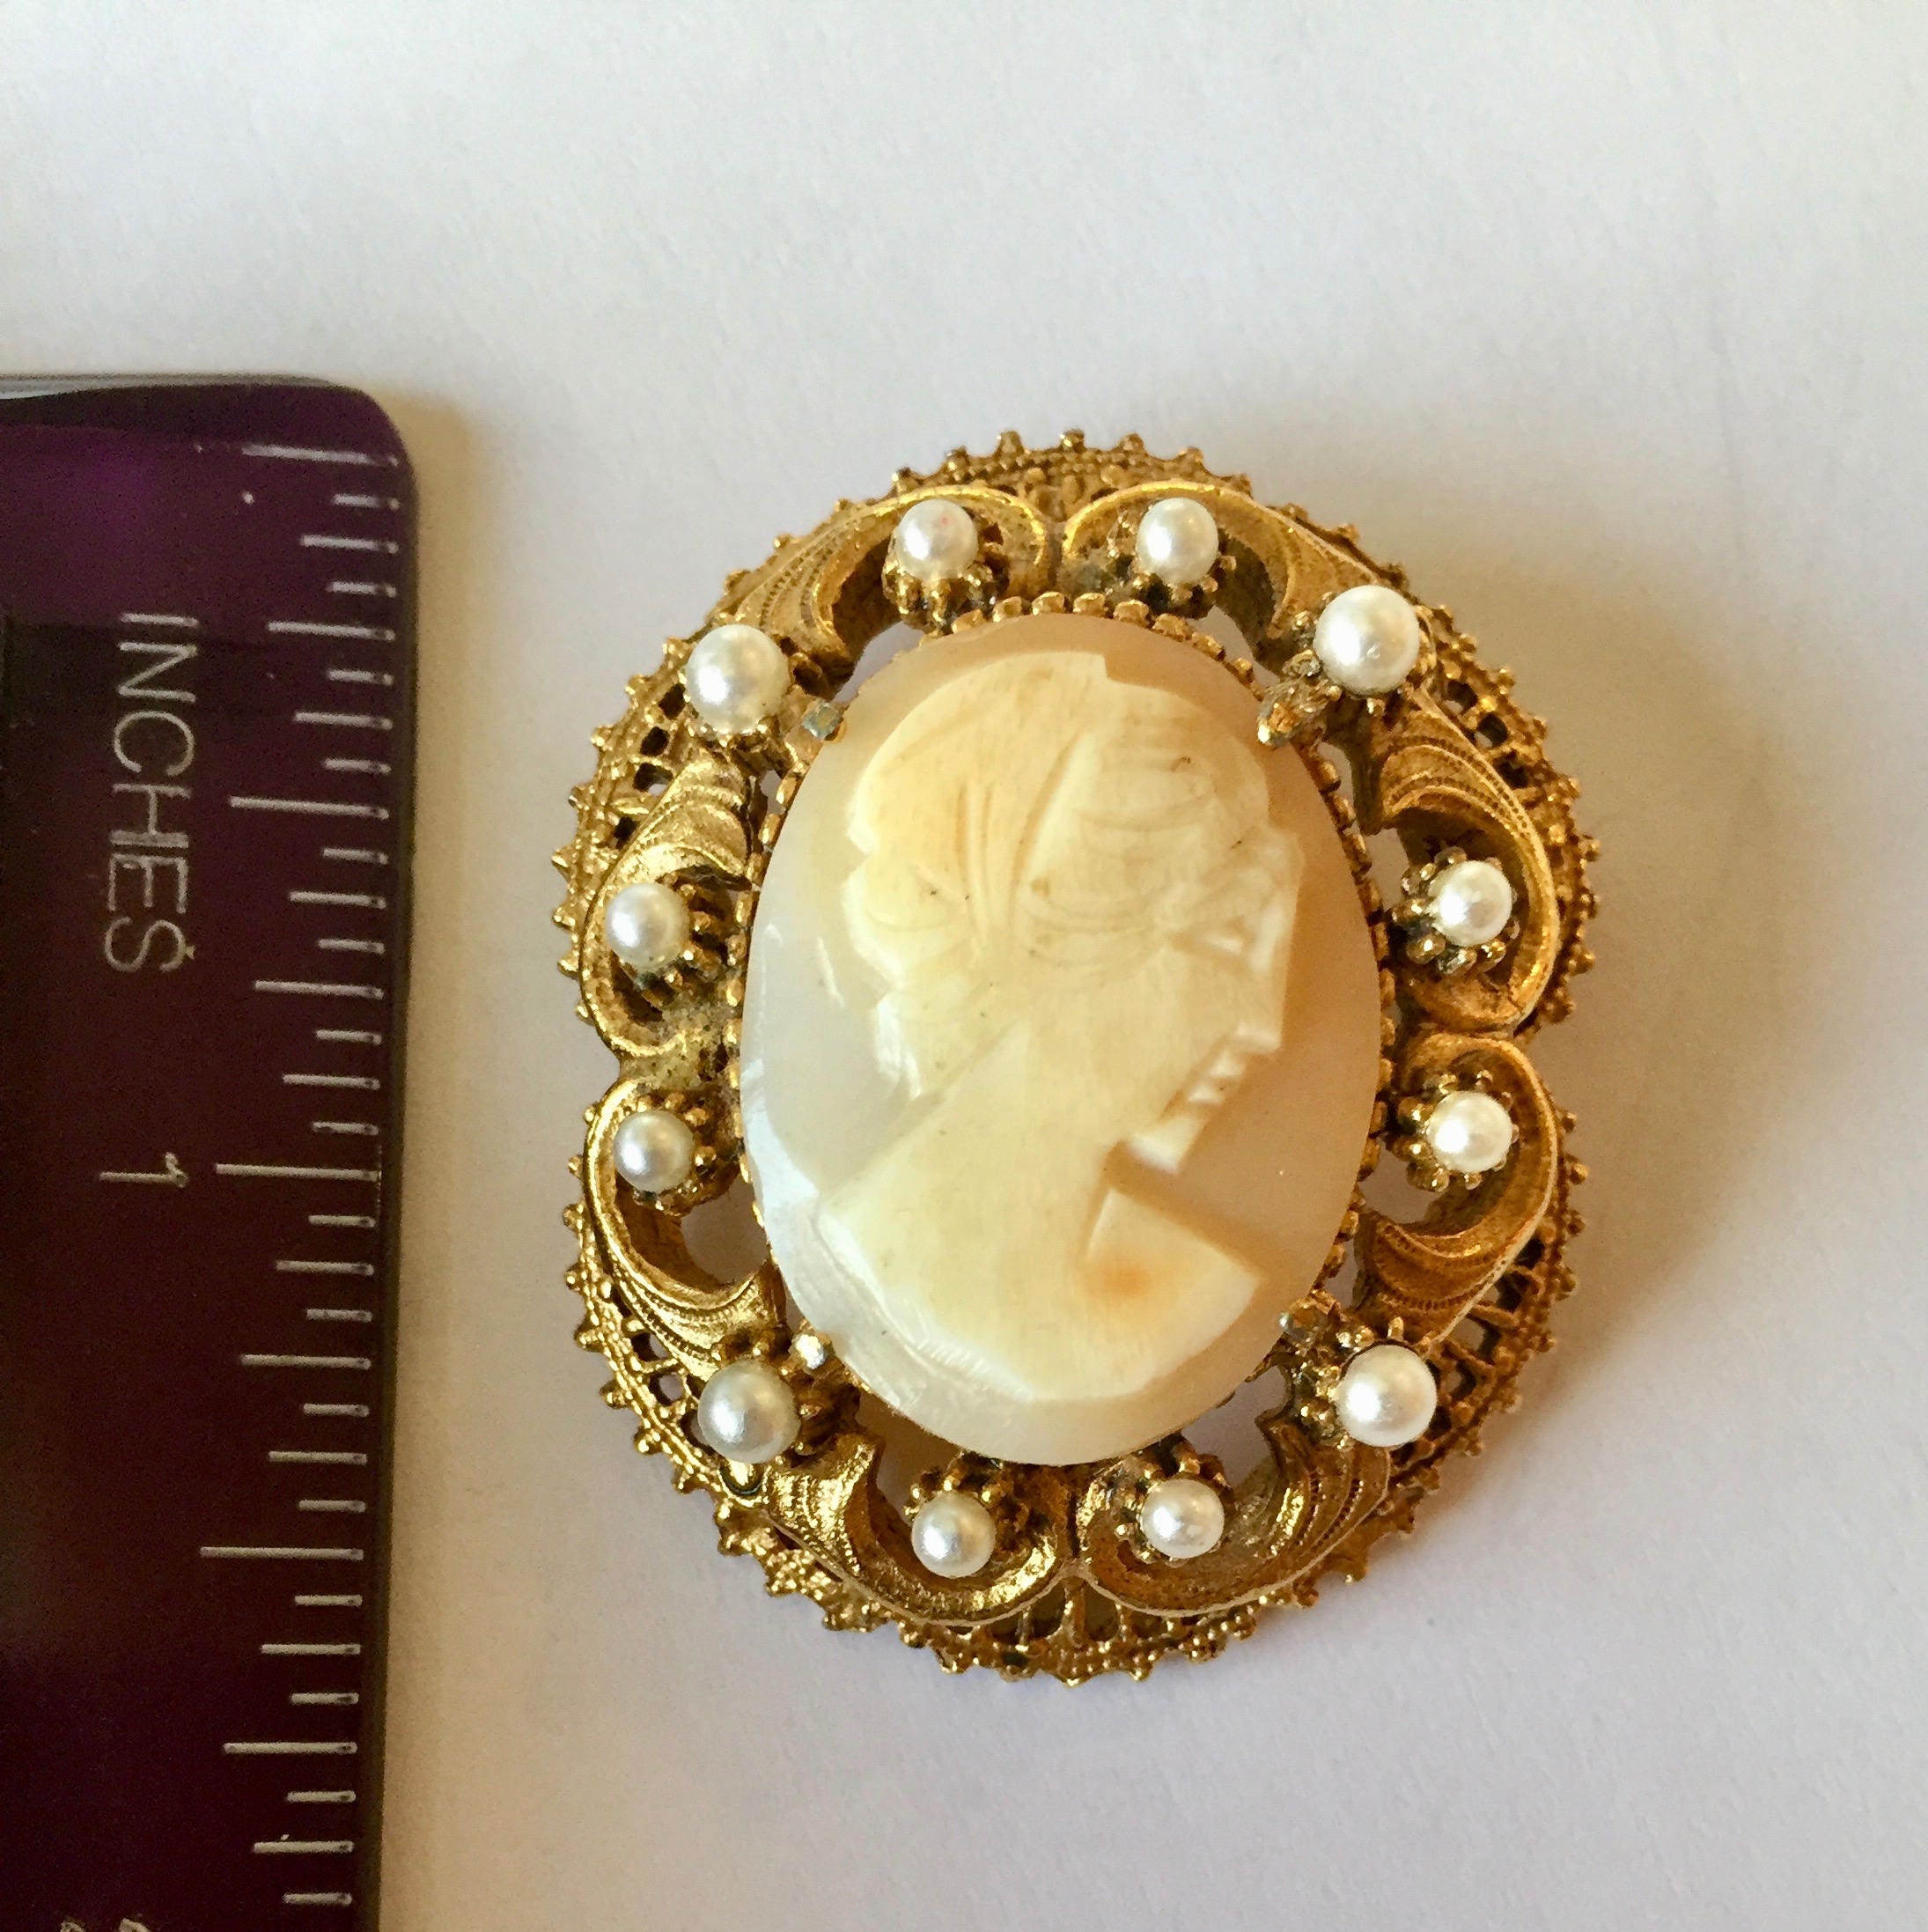 FLORENZA Gold and Pearls Framed Cameo Brooch / Pin or Pendant | Etsy